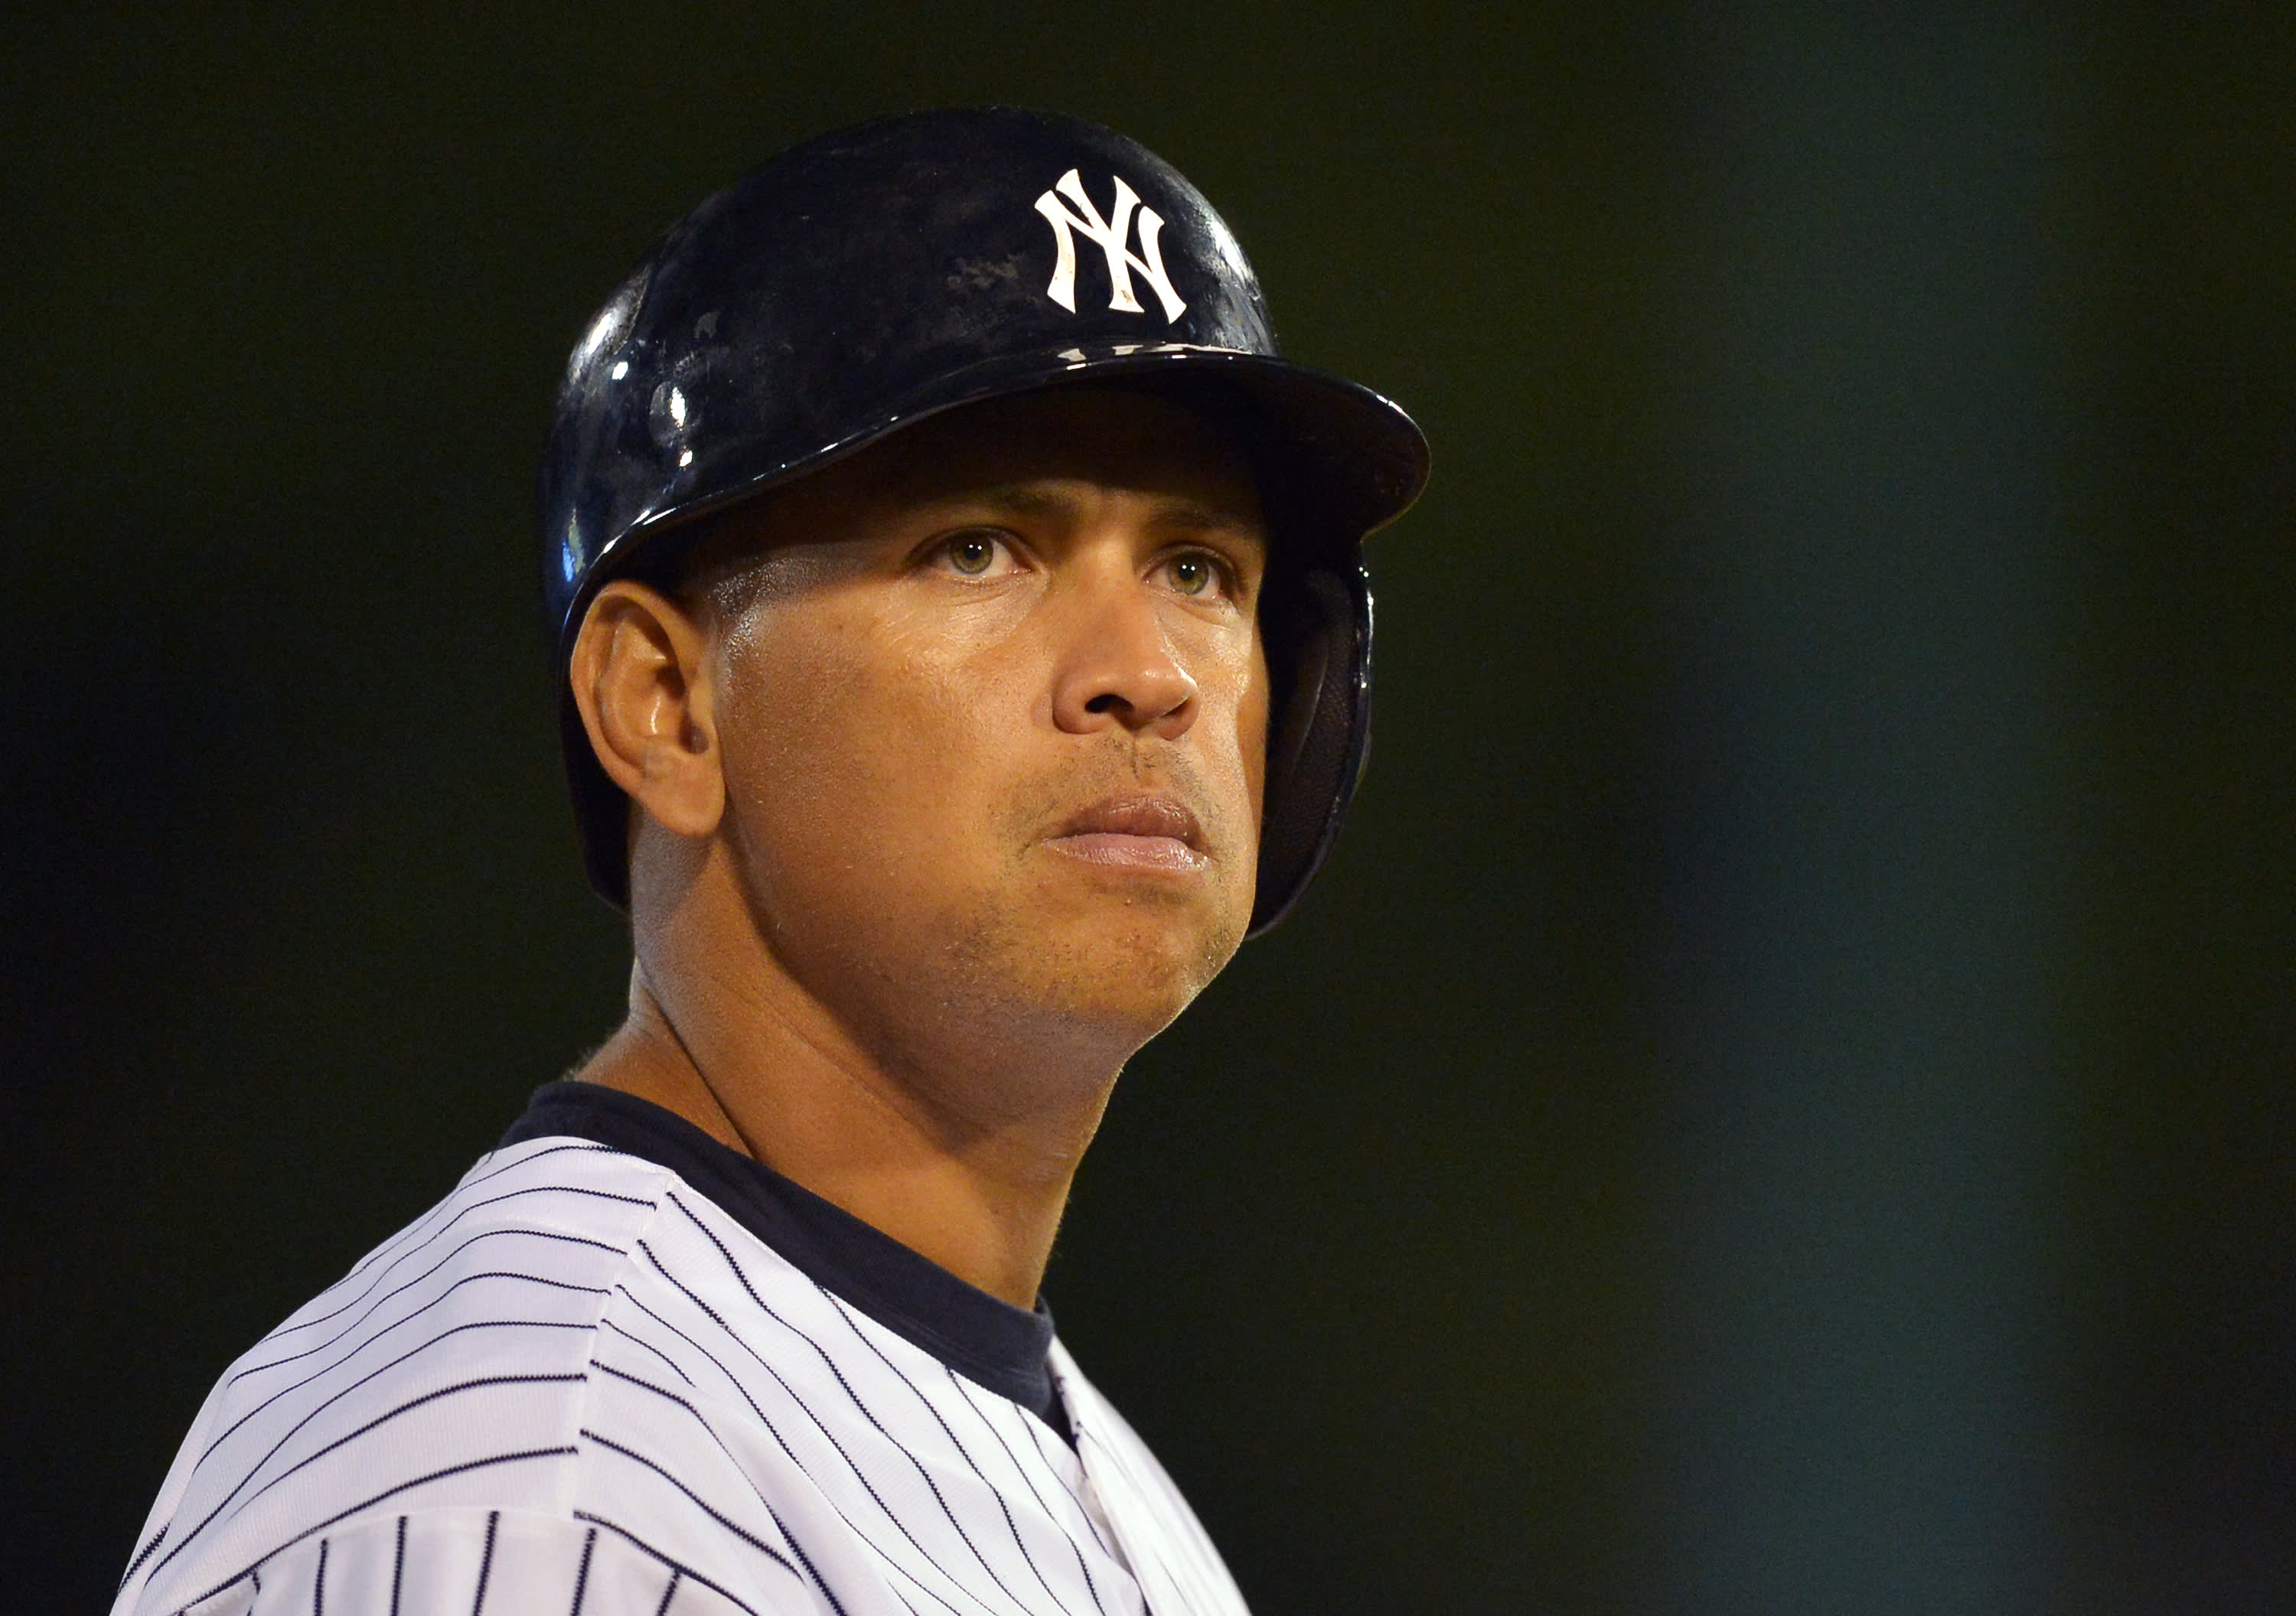 Should the Yankees have managed shortstop differently? 